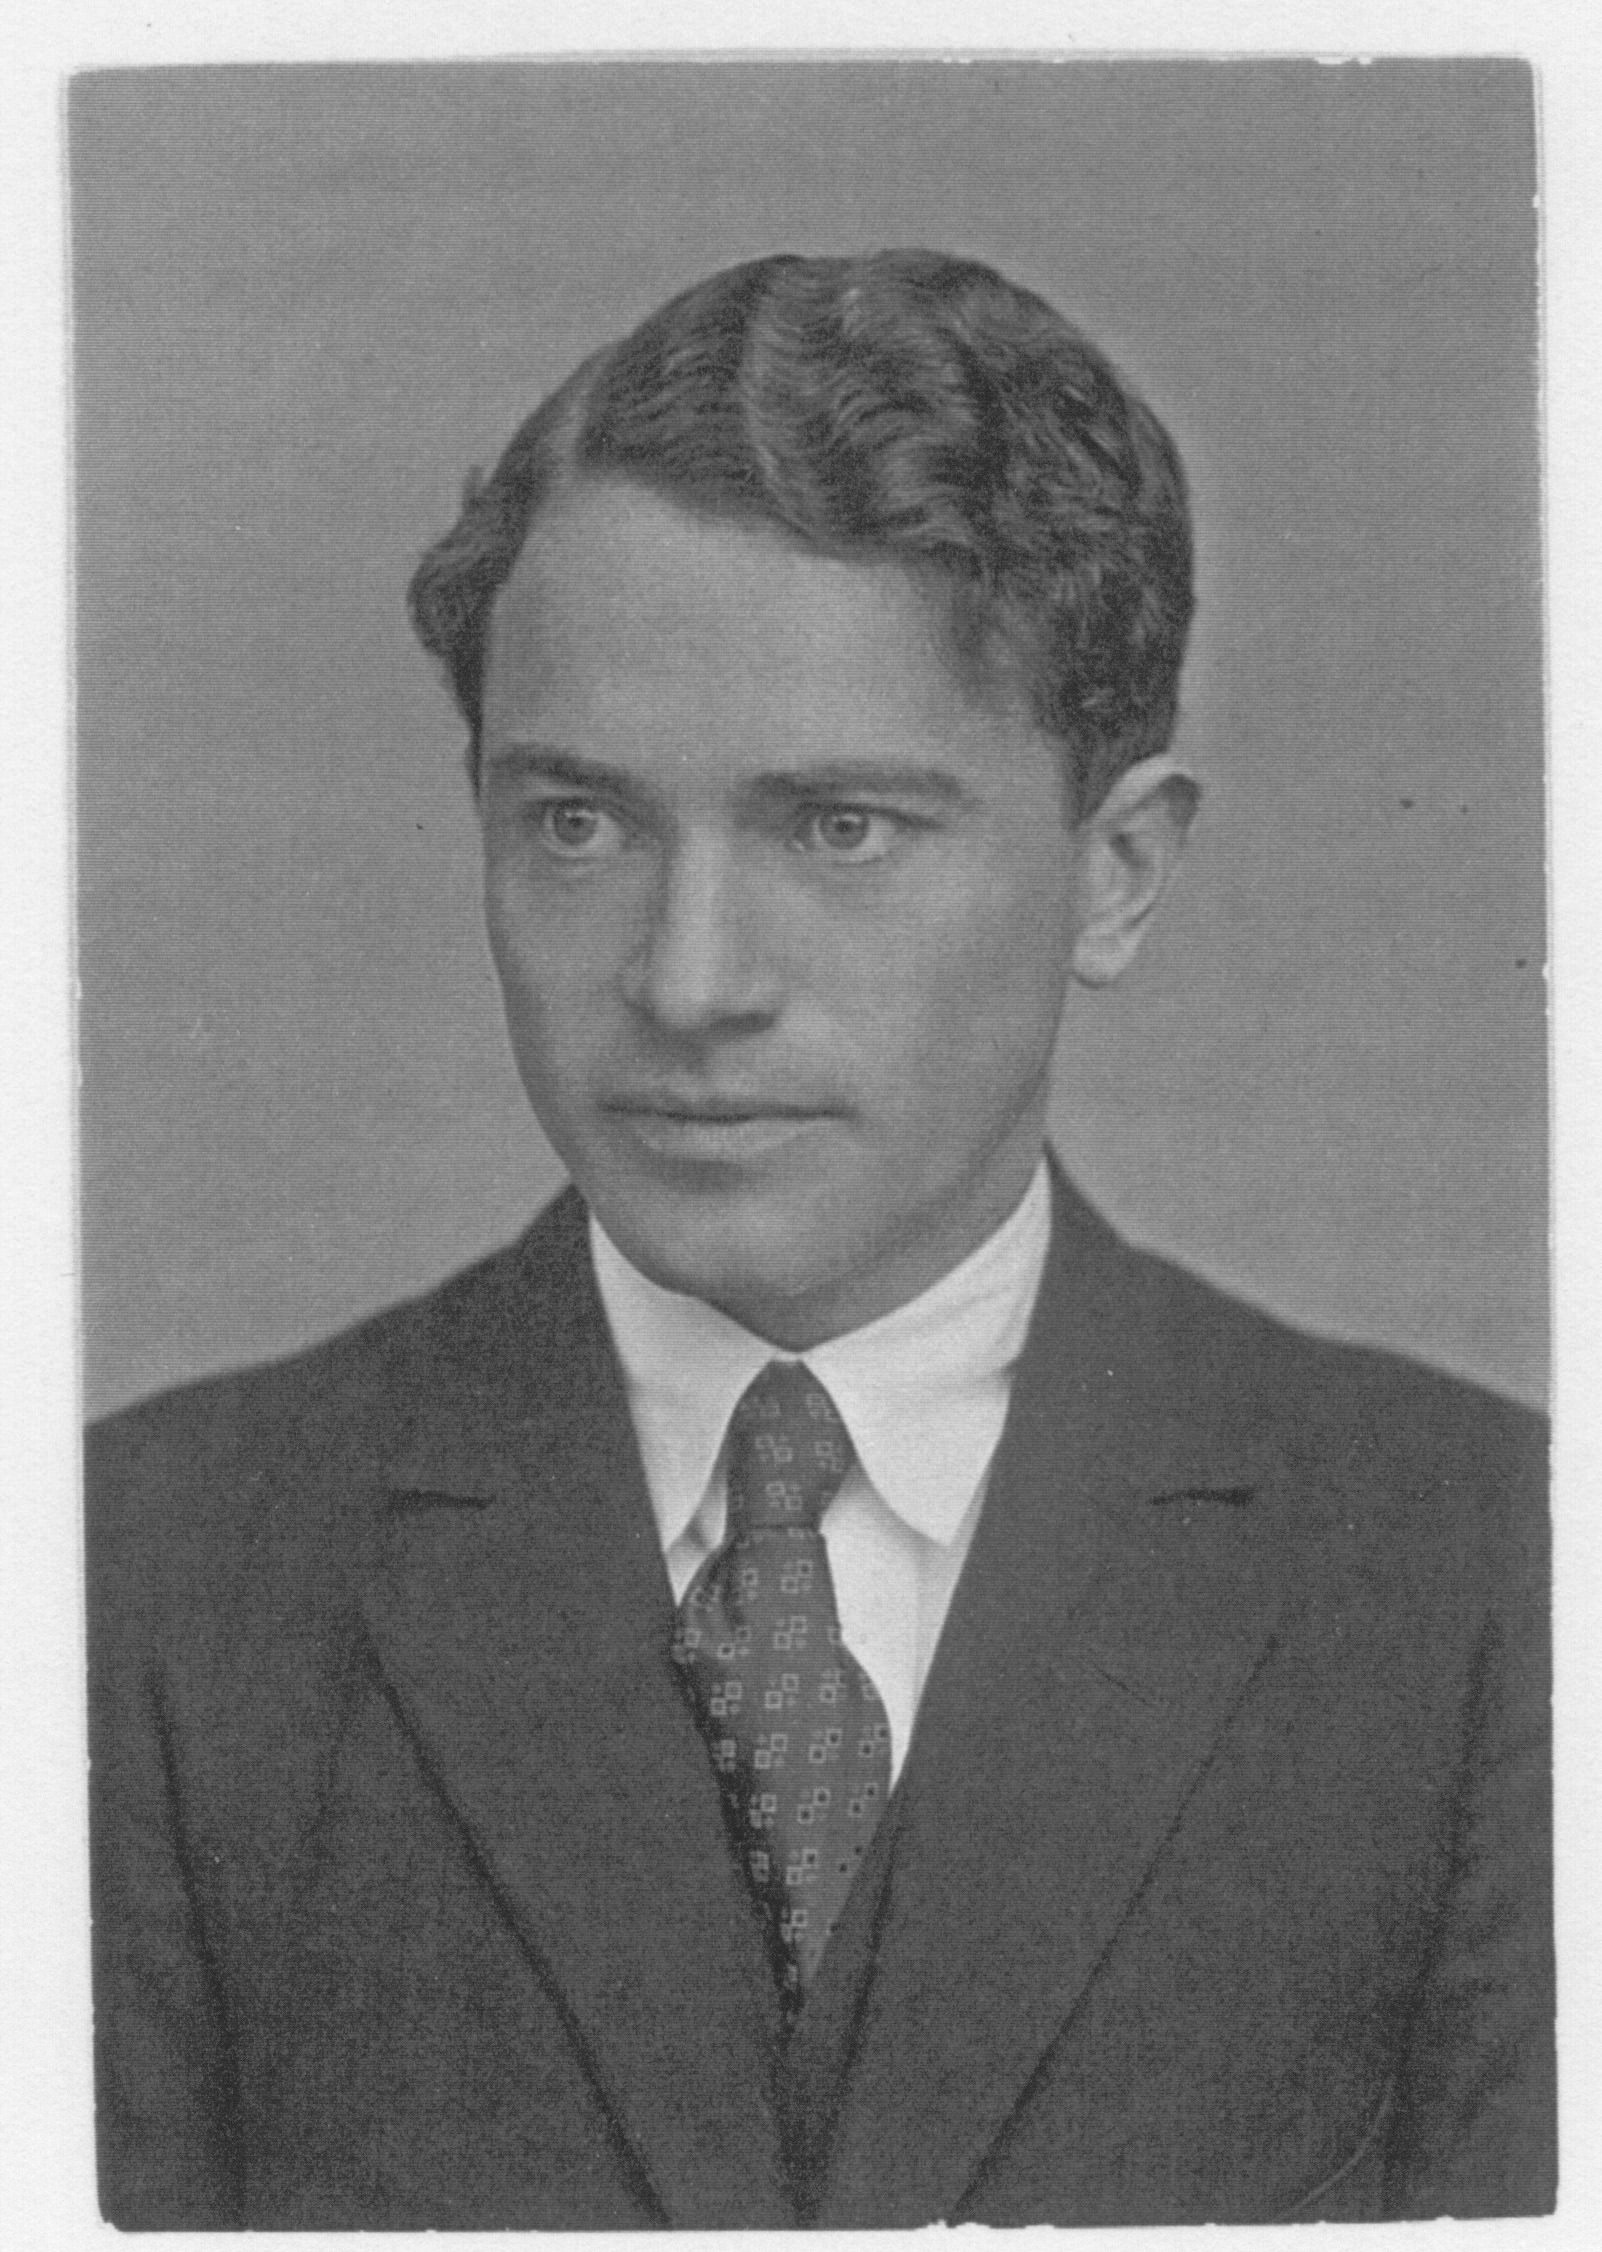 Sven S. Liljeblad (ca. 1927), a student of C.W. von Sydow, wrote his dissertation on the Grateful Dead. © RM James private collection